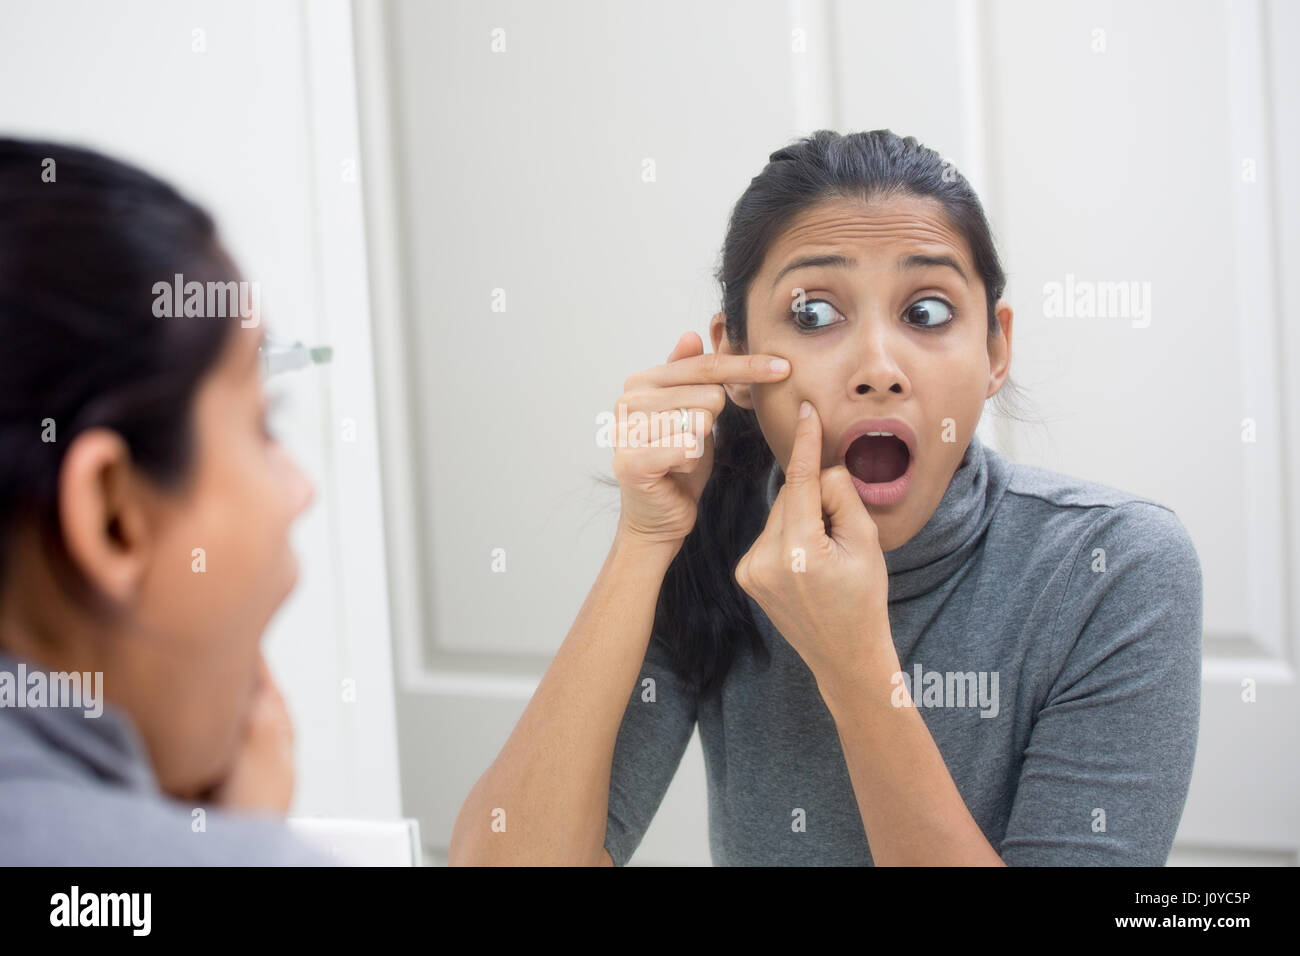 Closeup portrait of young frustrated woman surprised stunned to see zit on her face, gray turtleneck, isolated mirror reflection background. Facial  f Stock Photo